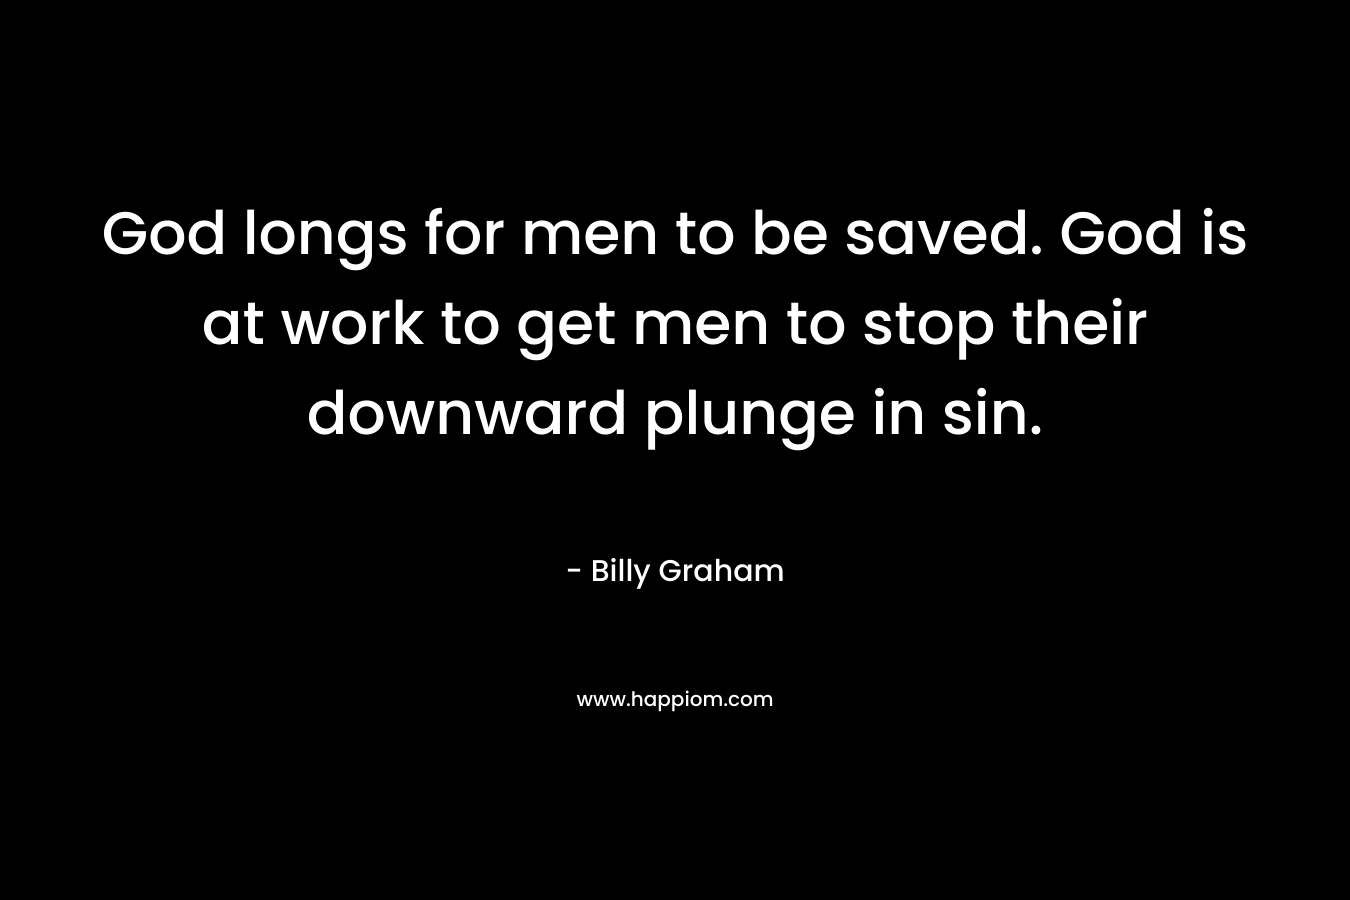 God longs for men to be saved. God is at work to get men to stop their downward plunge in sin. – Billy Graham